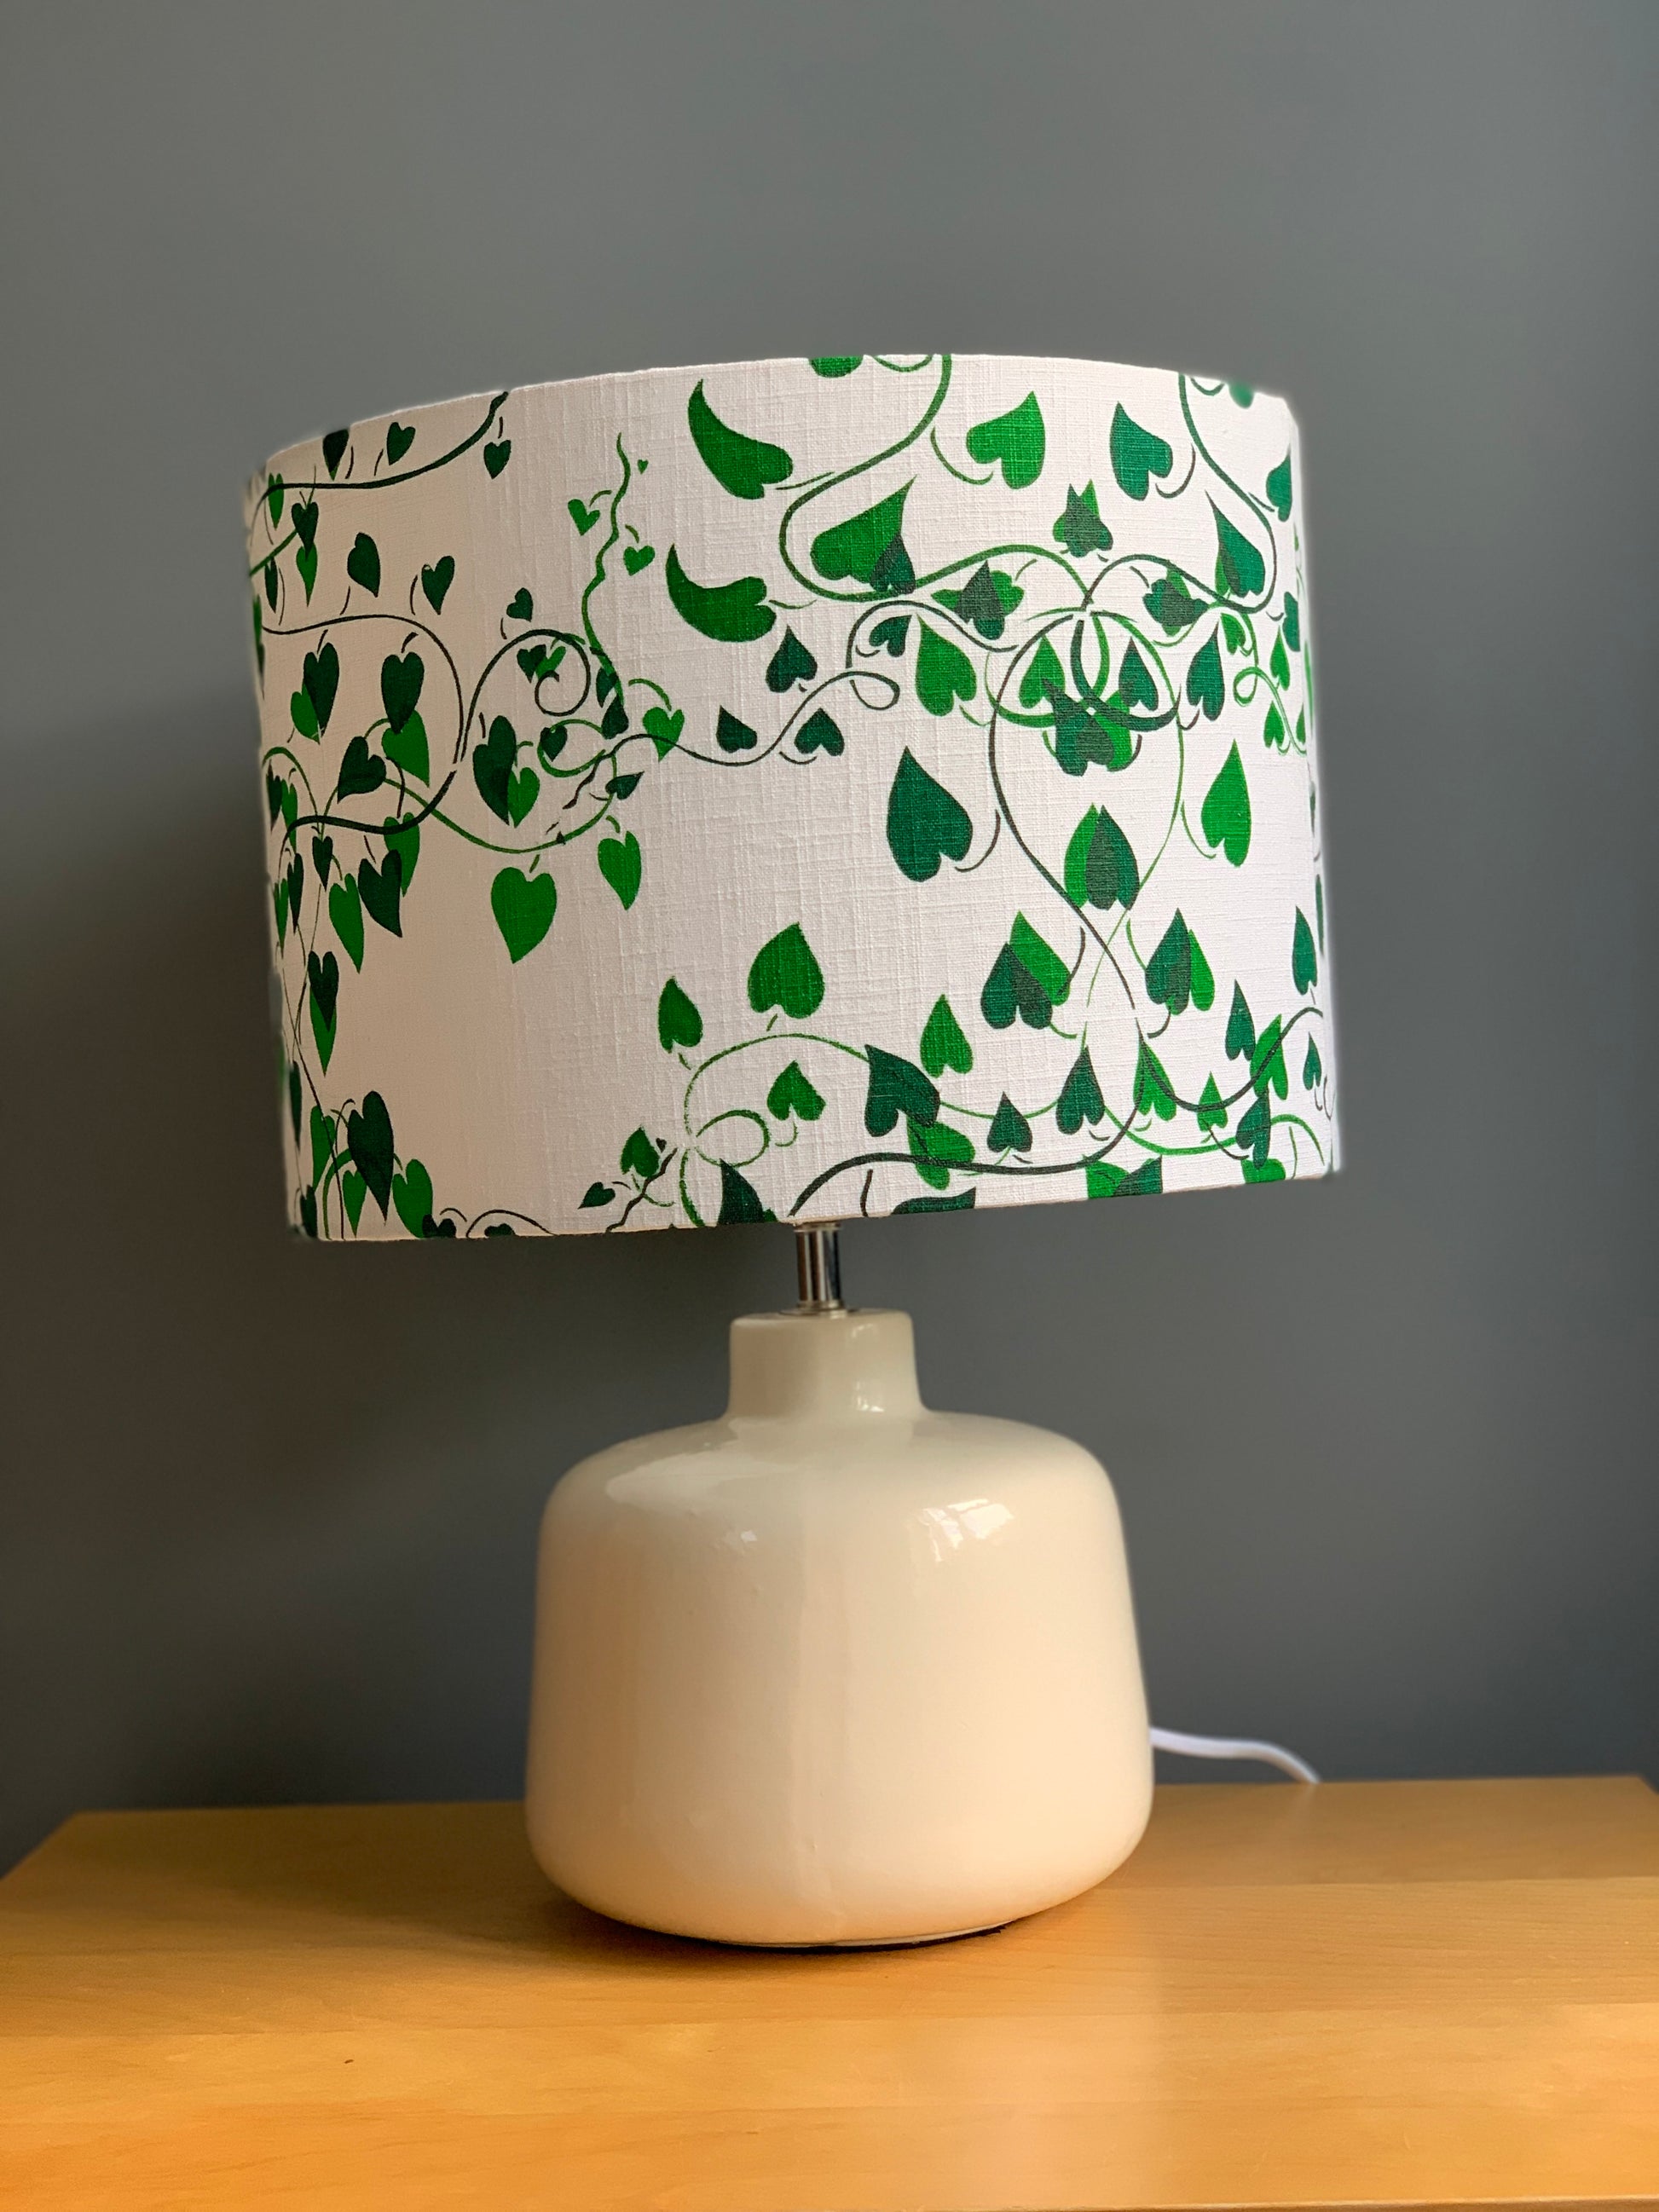 Shades of green on white fabric  handprinted lampshade in  a convolvulus design on cream lamp base.